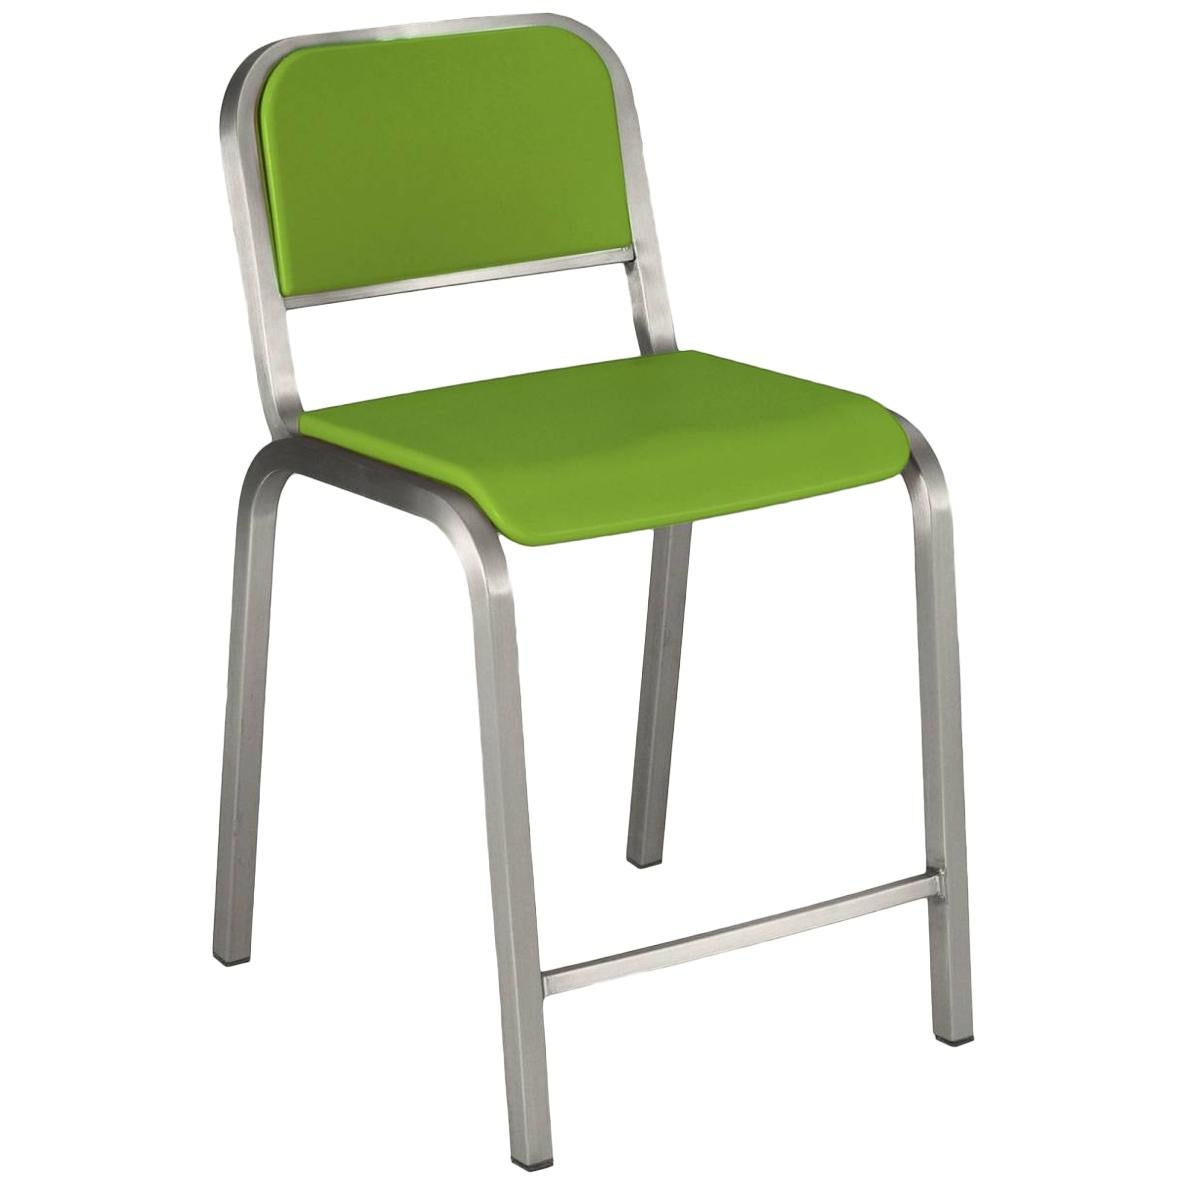 Emeco Nine-0 Counter Stool in Brushed Aluminum and Green by Ettore Sottsass